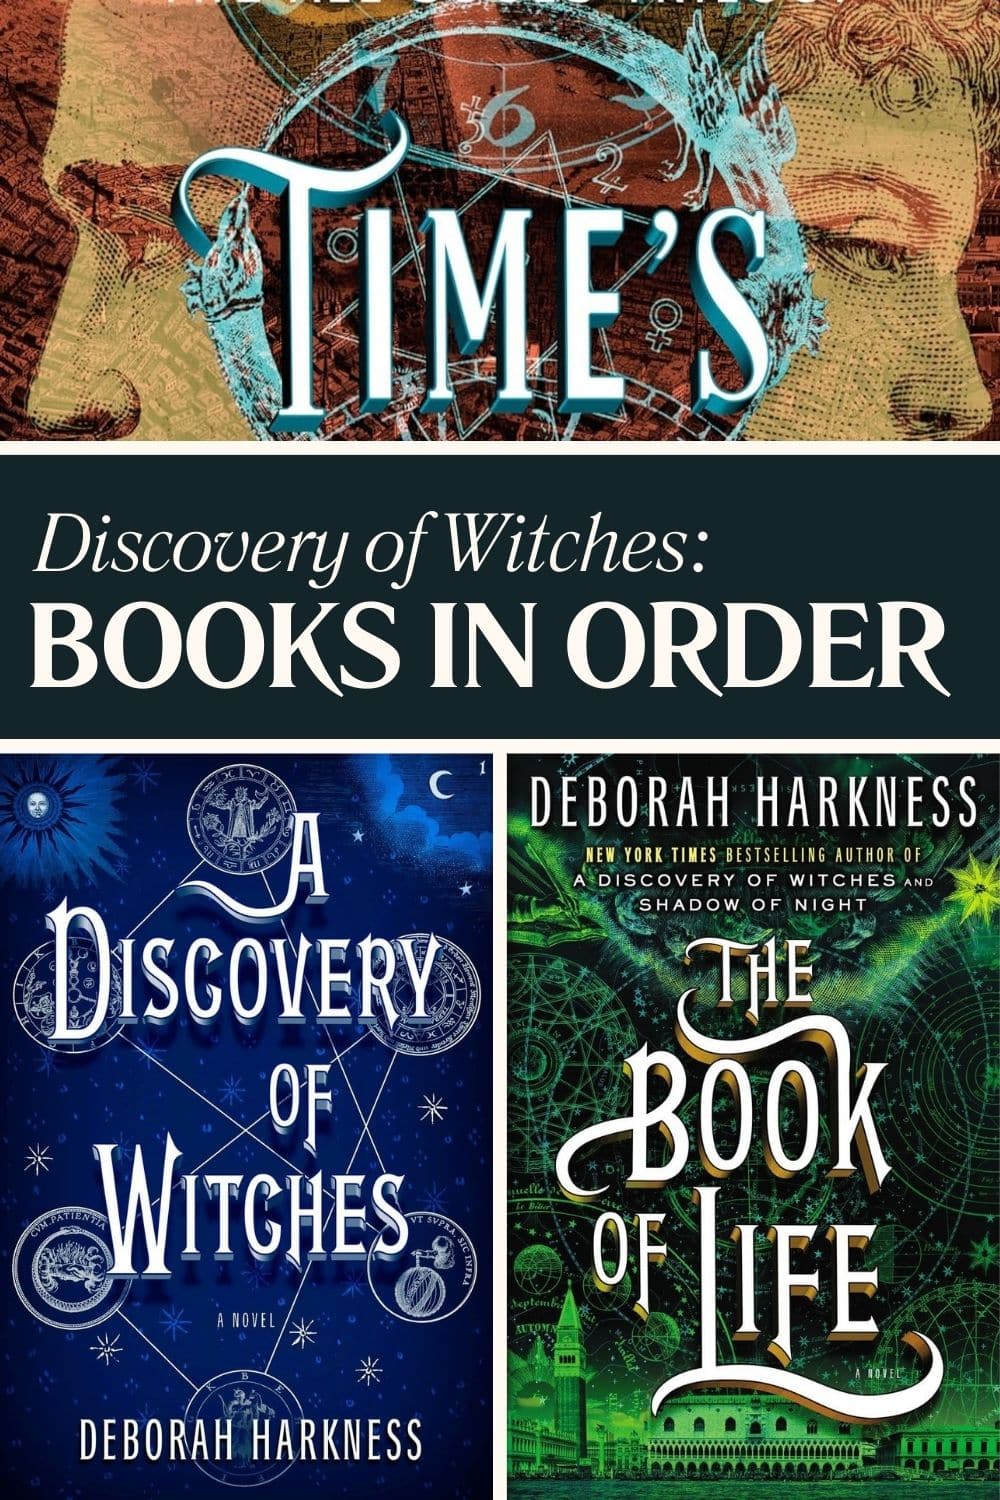 a discovery of witches trilogy in order deborah harkness 2